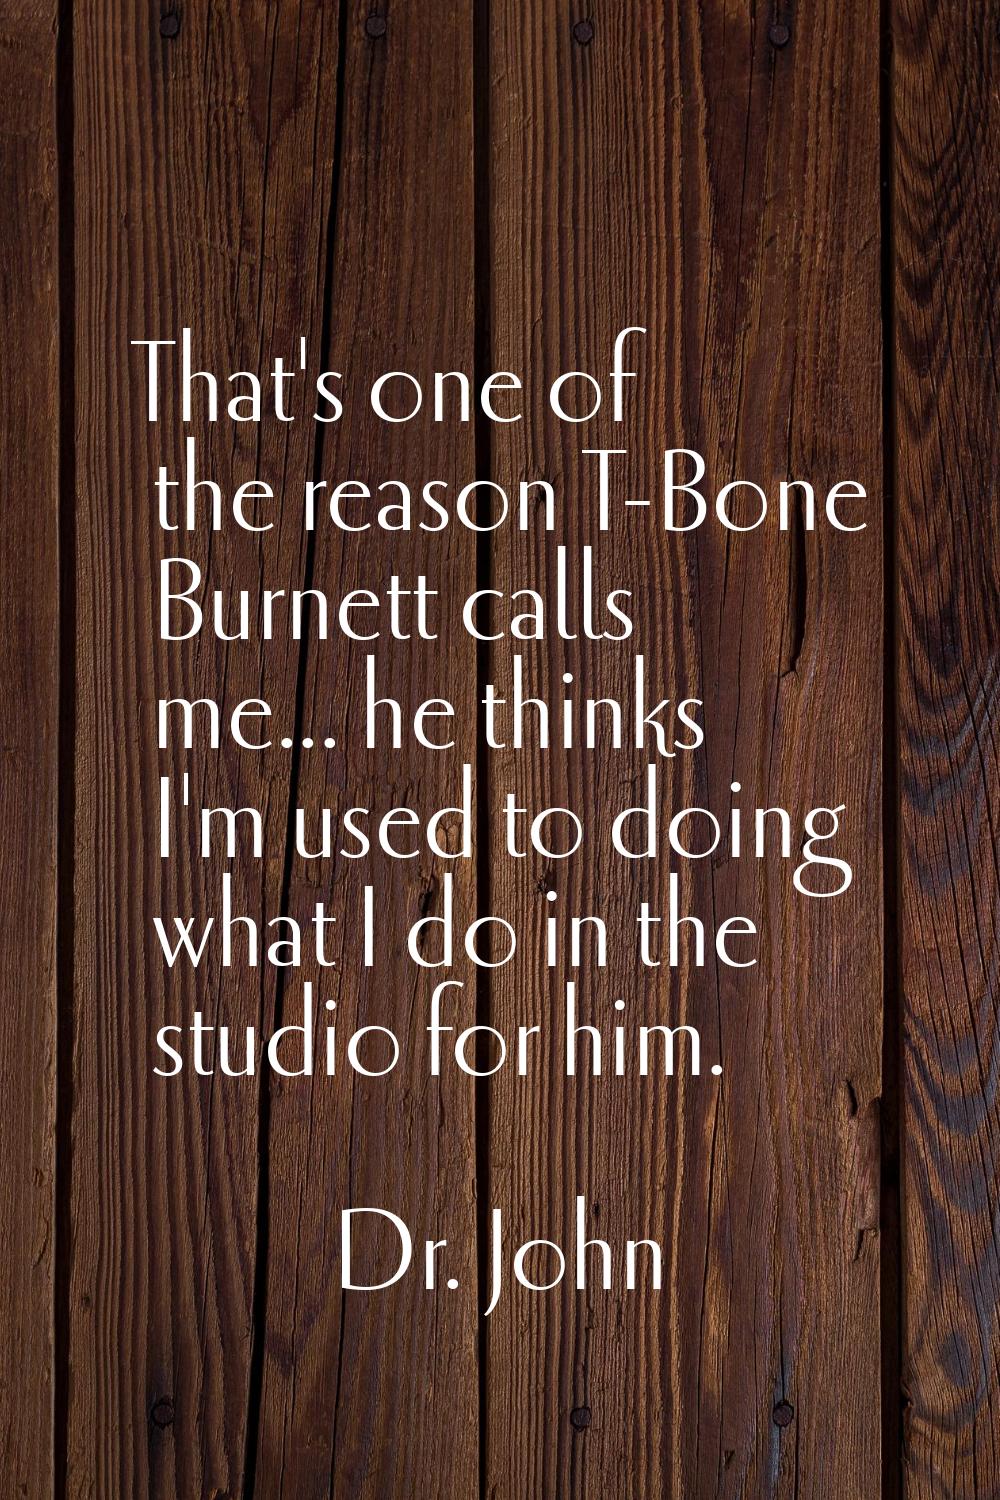 That's one of the reason T-Bone Burnett calls me... he thinks I'm used to doing what I do in the st